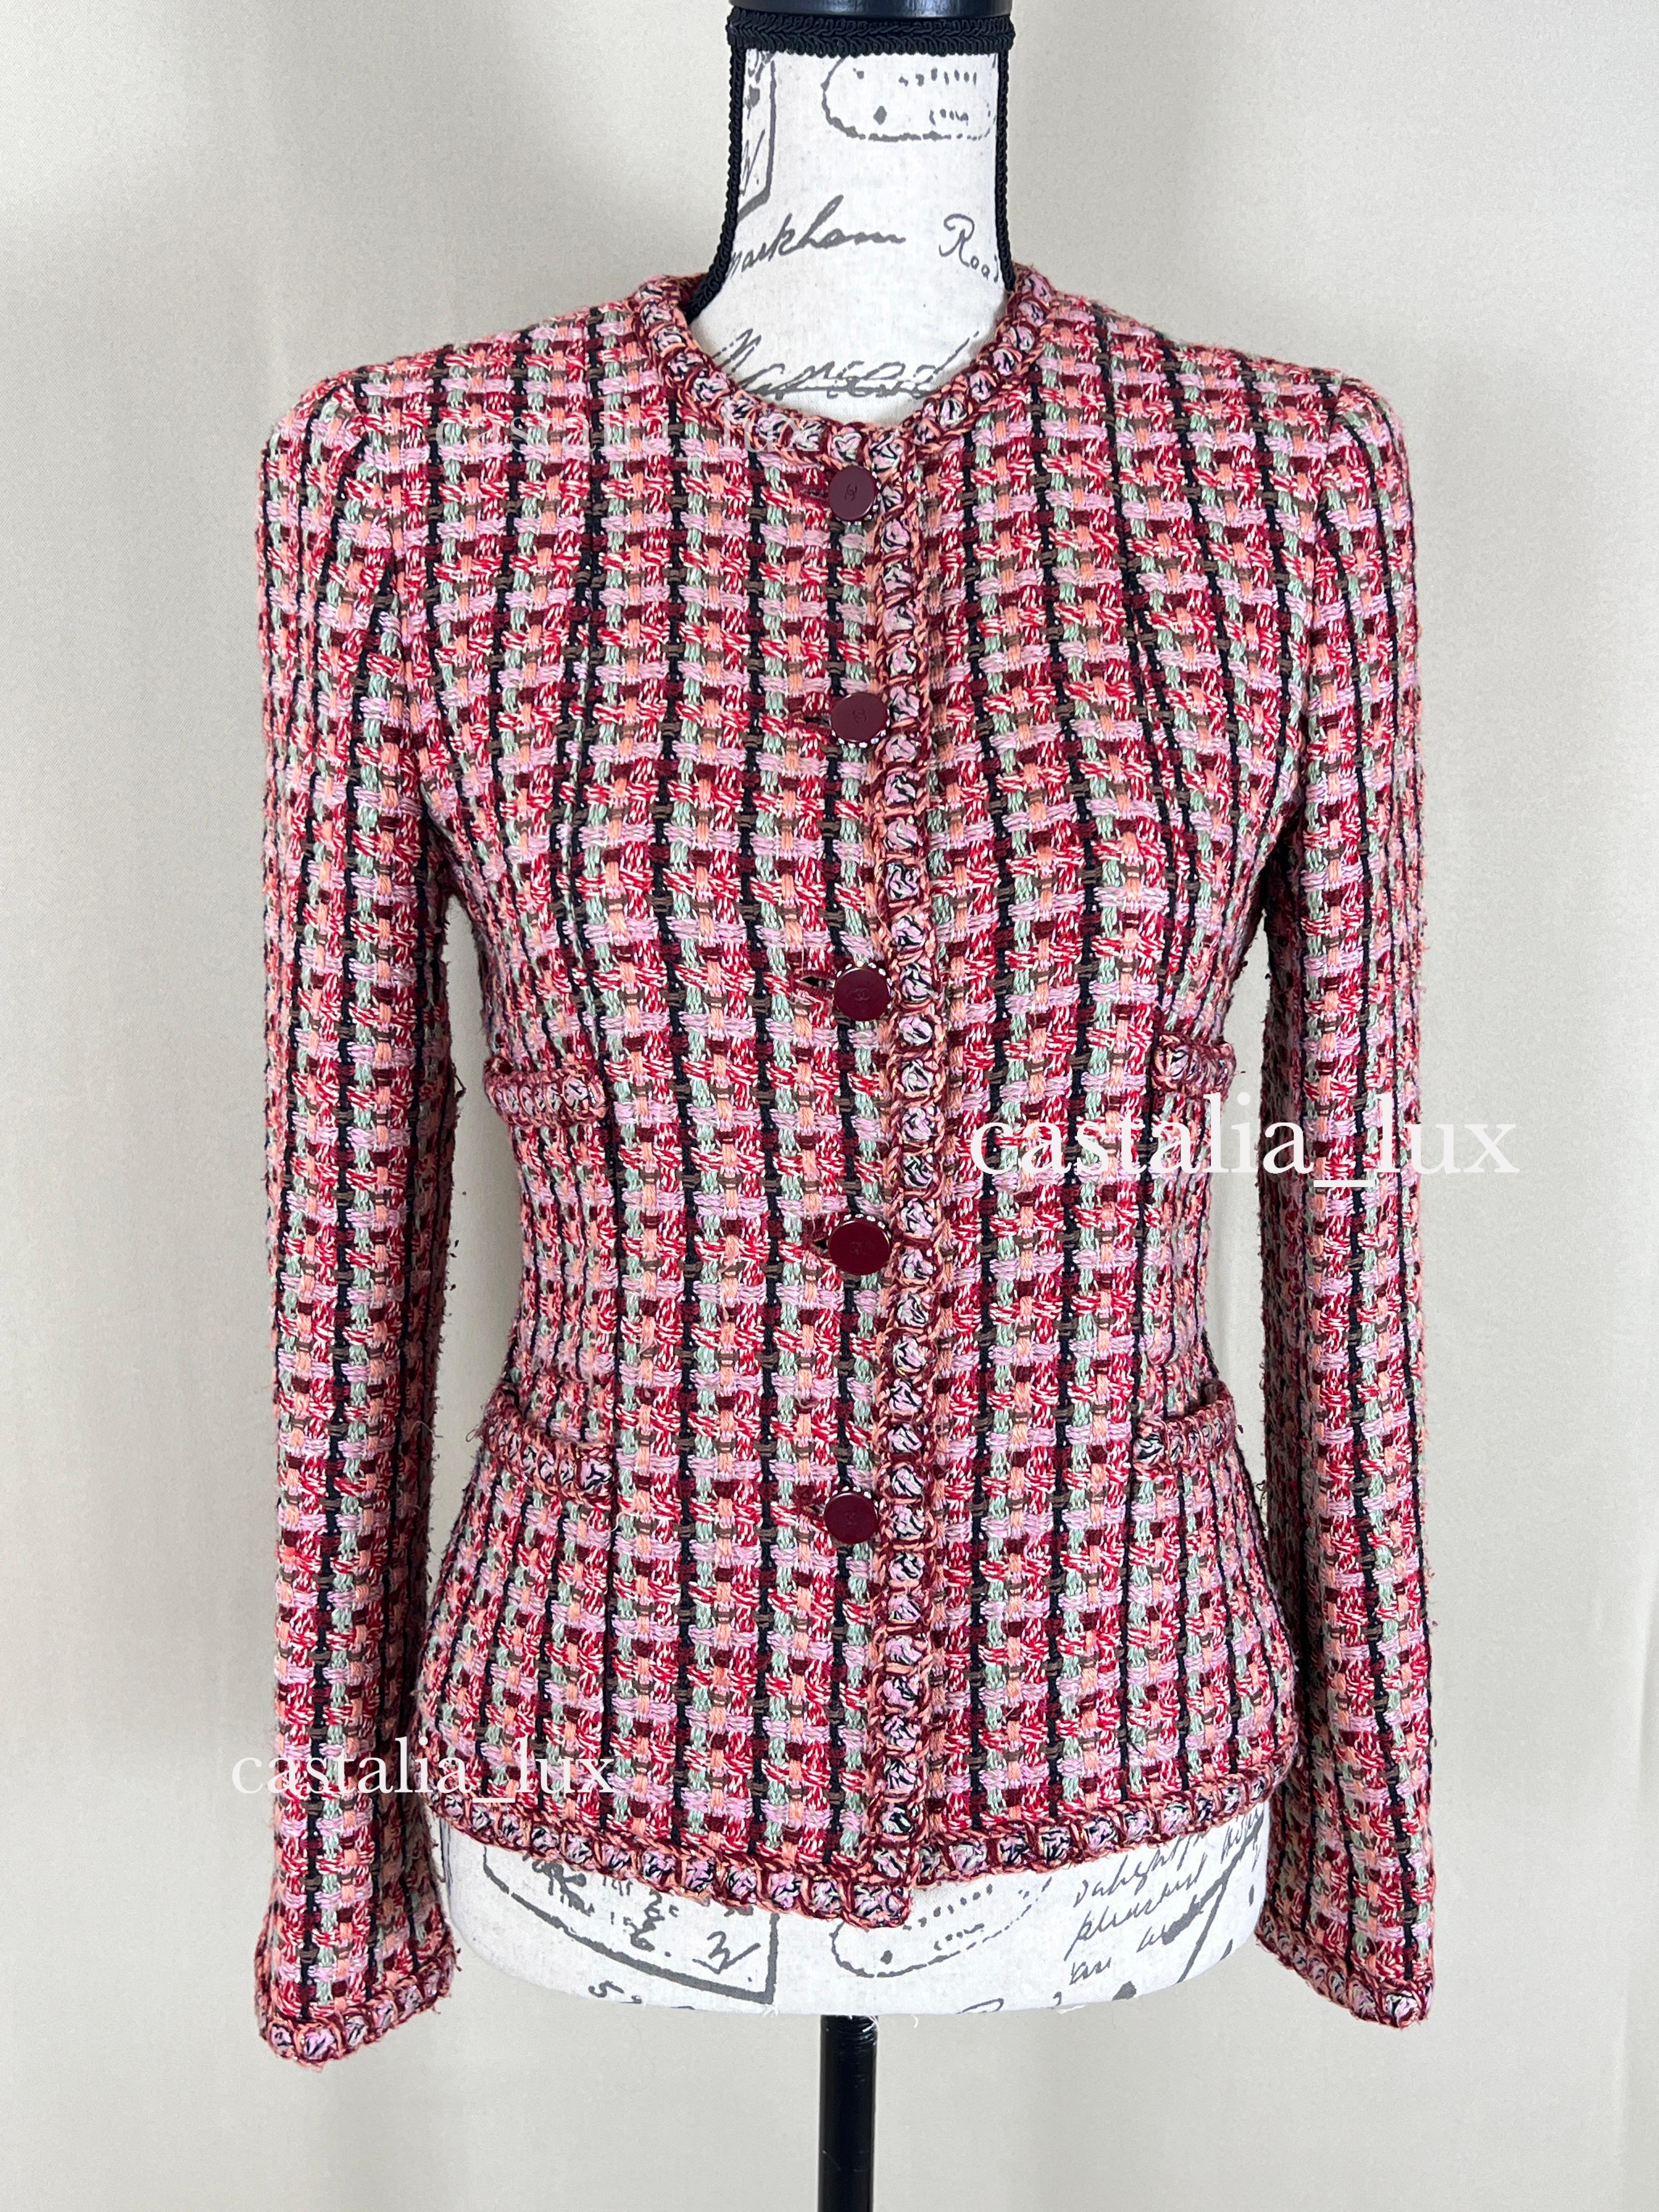 Chanel Collectible 4-Pockets Tweed Jacket For Sale 4